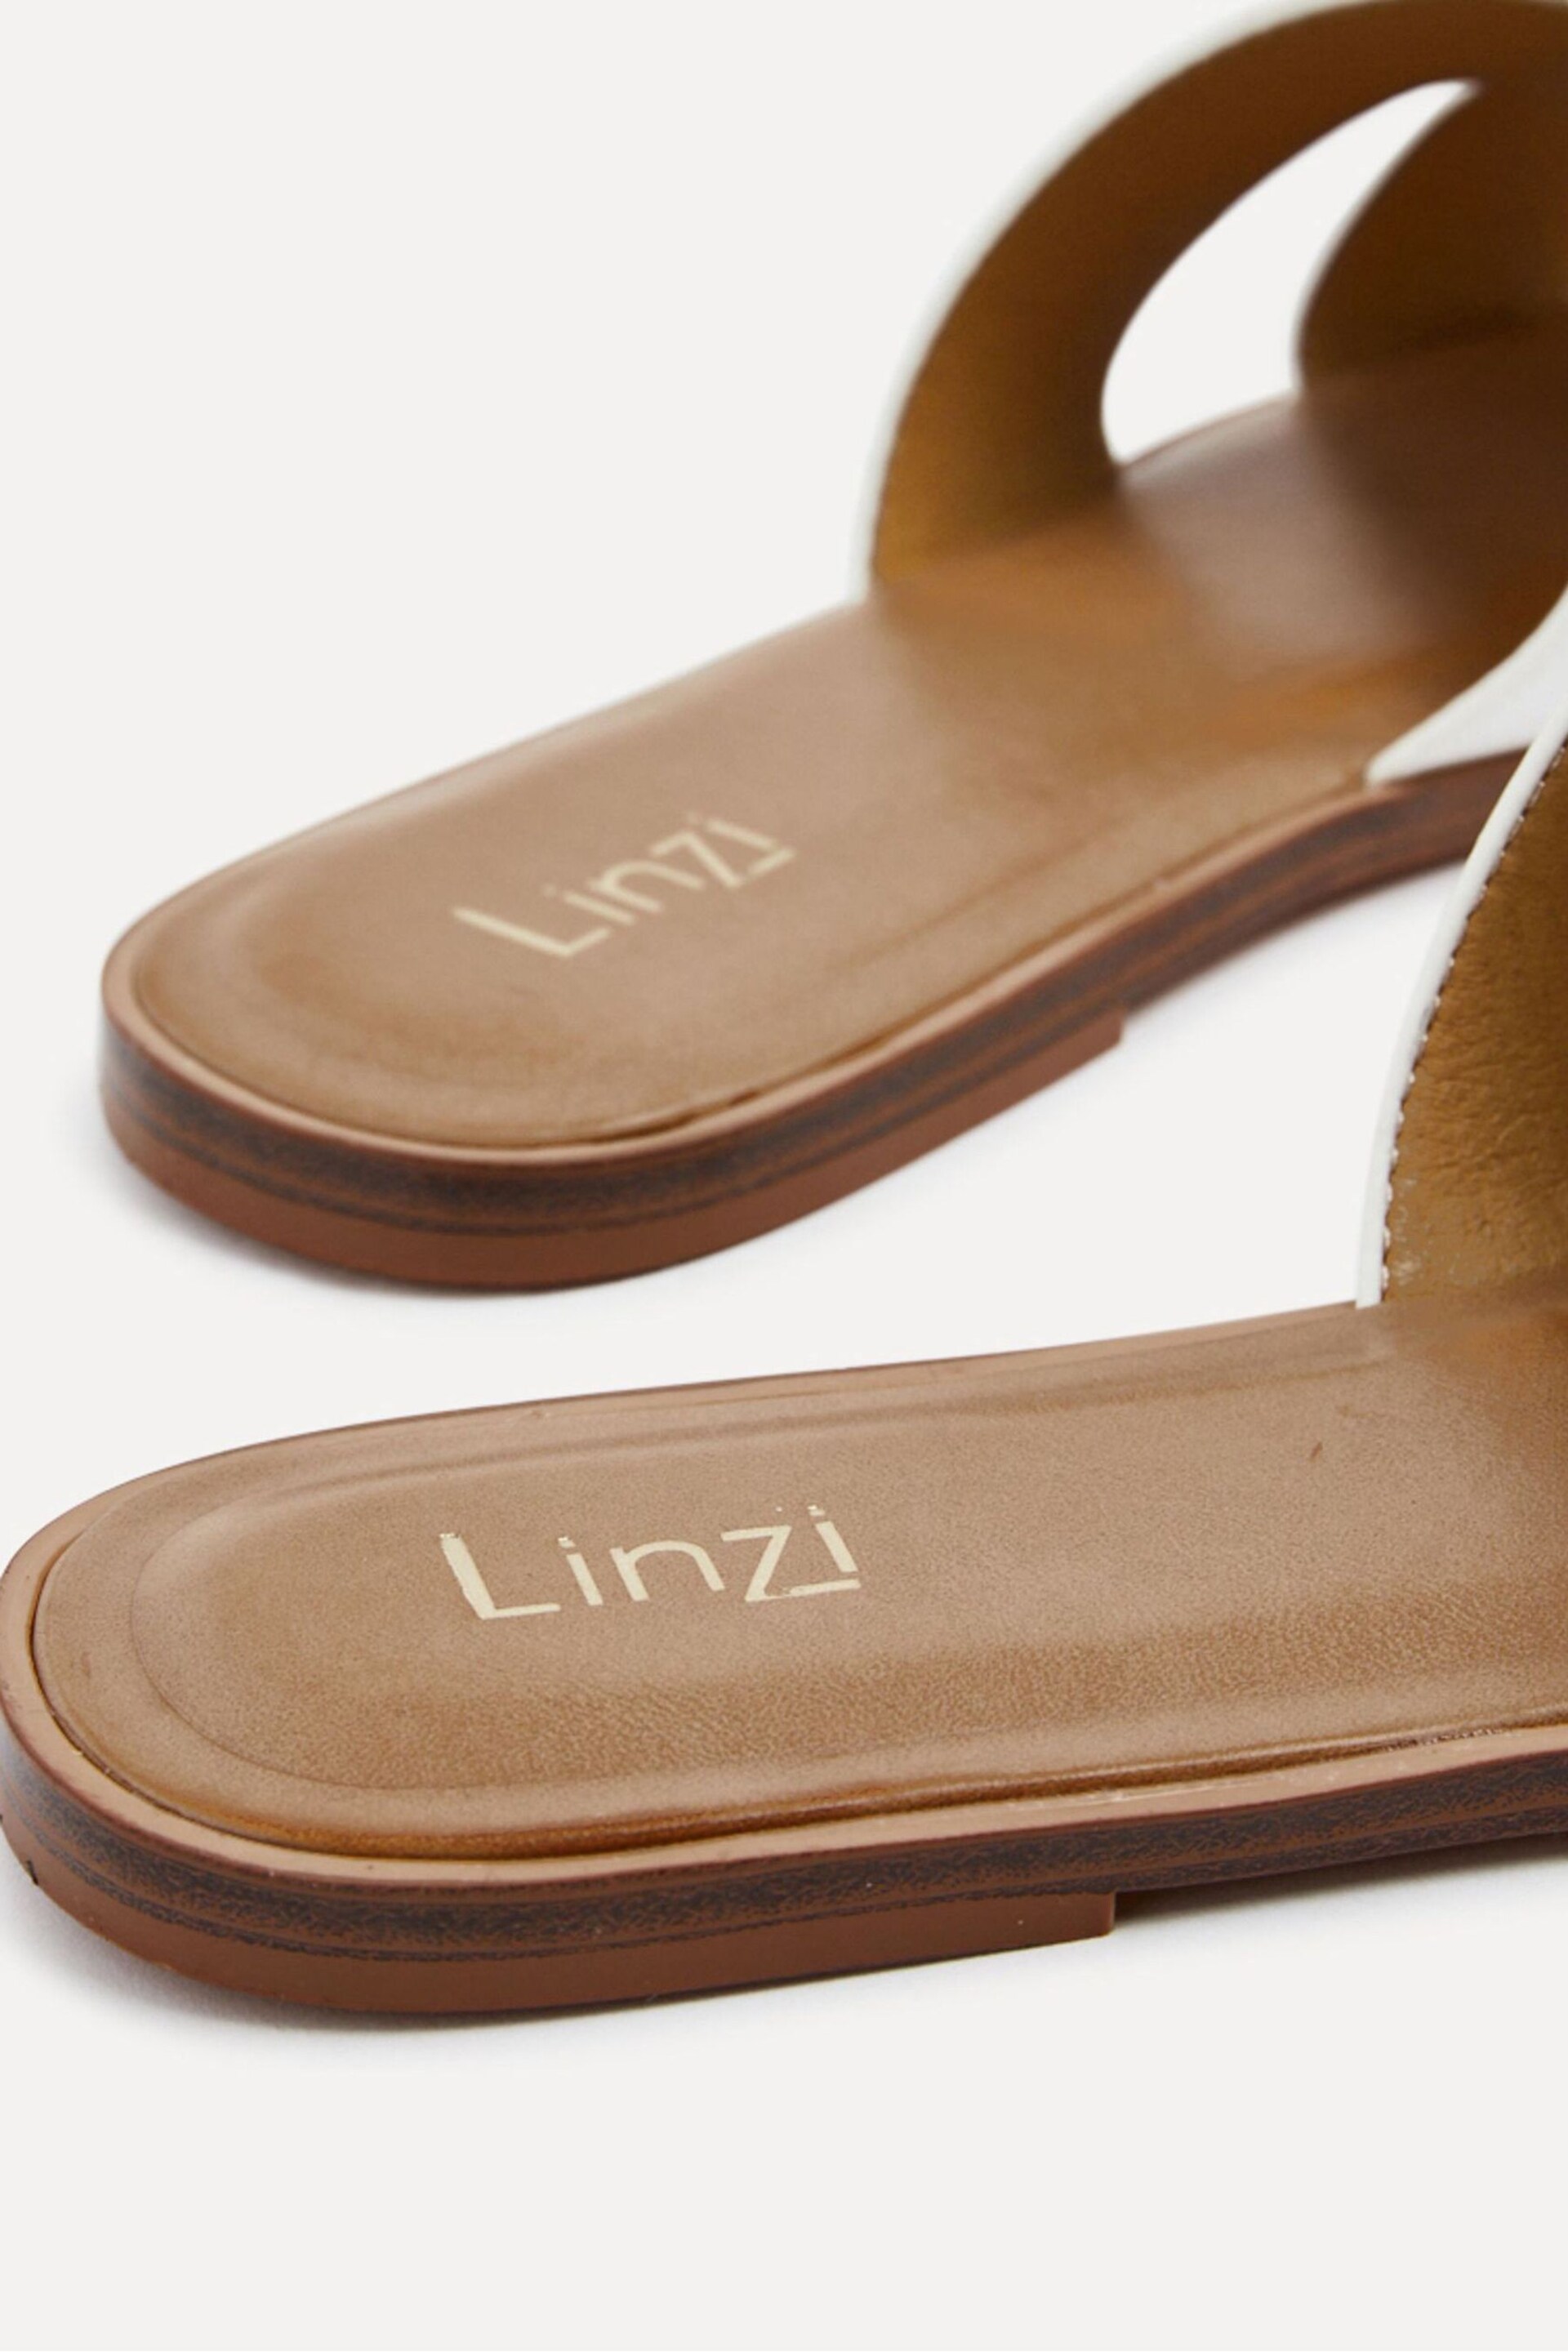 Linzi White Petra Flat Sliders With Open Loop Detailing - Image 5 of 5